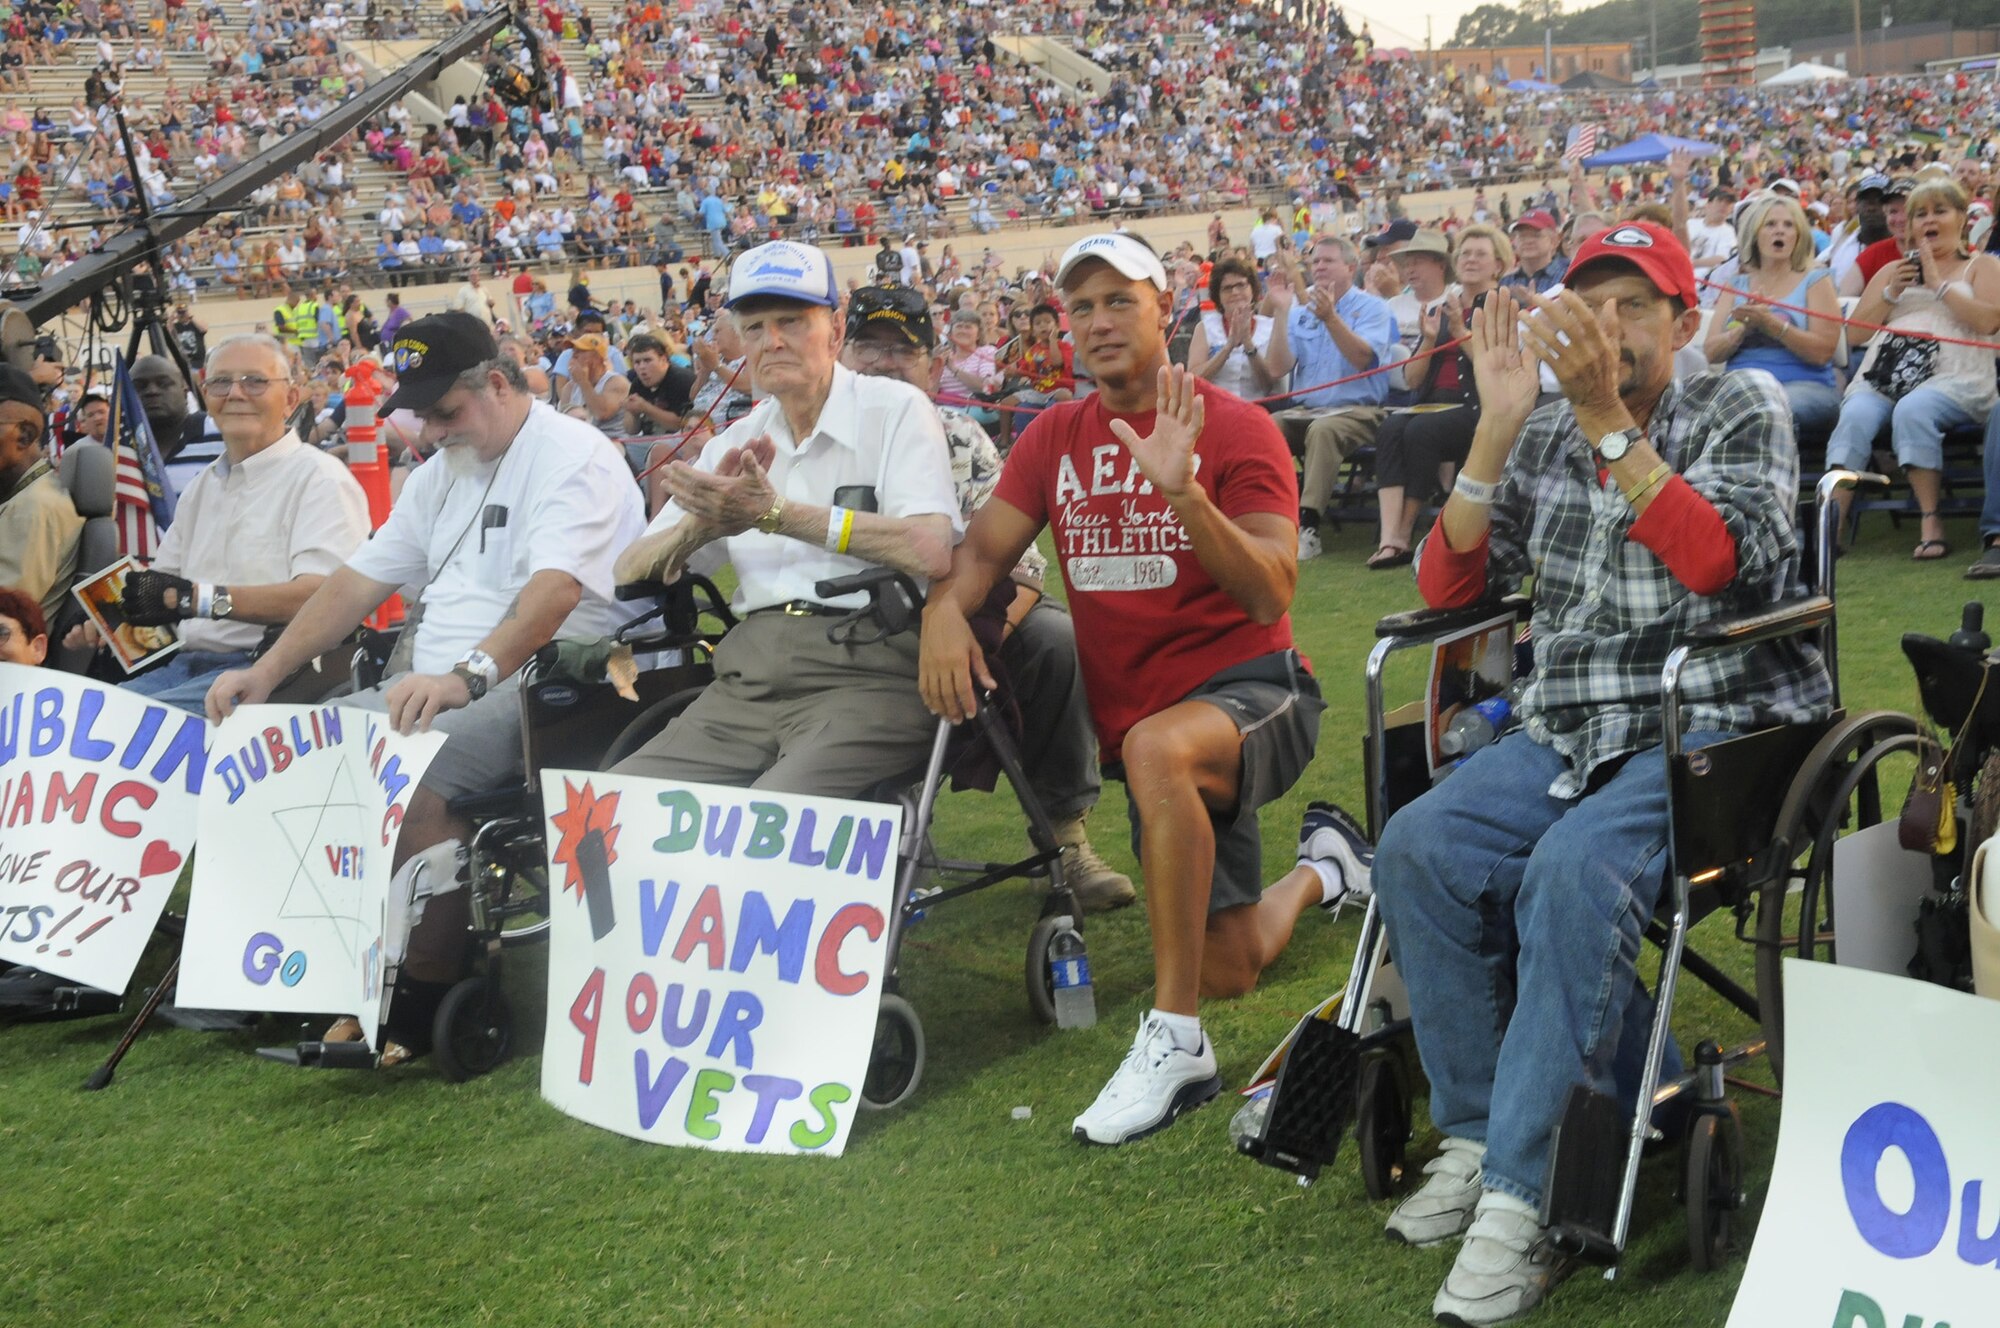 A group of veterans from Dublin VA Medical Center, were distinquished guests and given a front-row seat at the concert. U. S. Air Force photo by Sue Sapp 